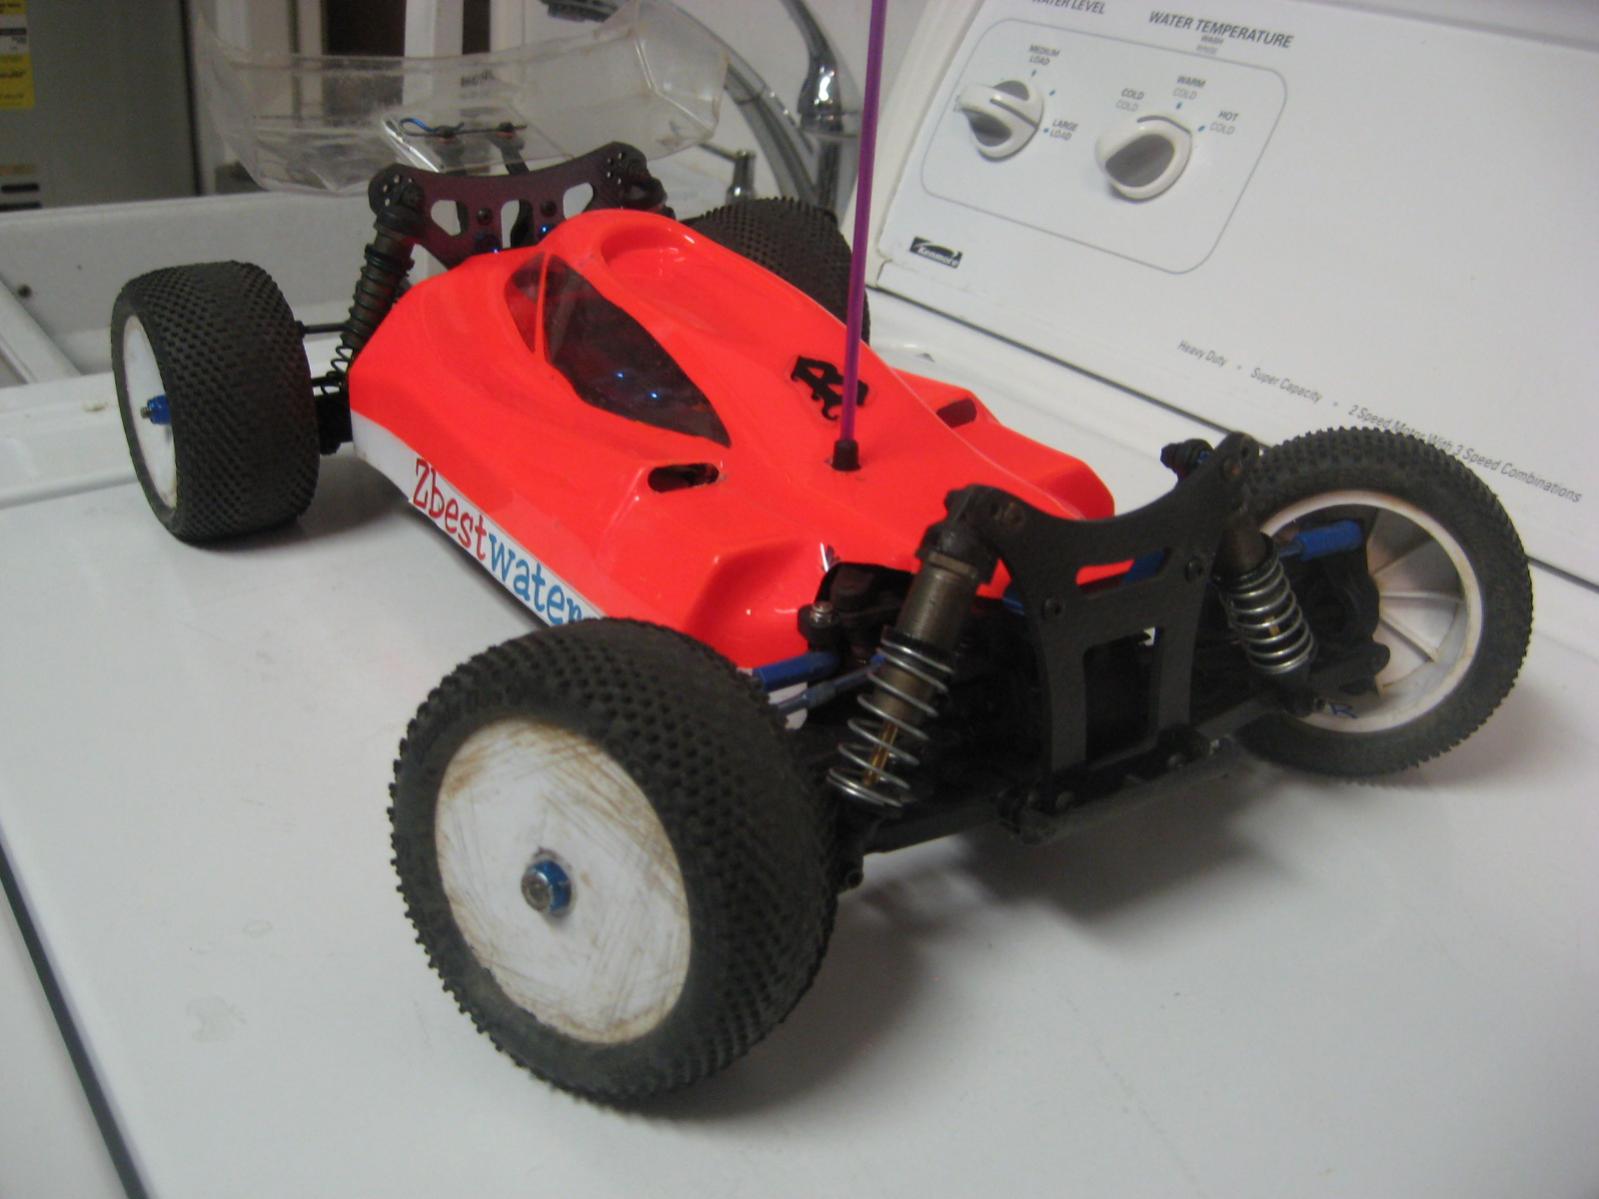 Post pics of all offroad buggys!!! - R/C Tech Forums